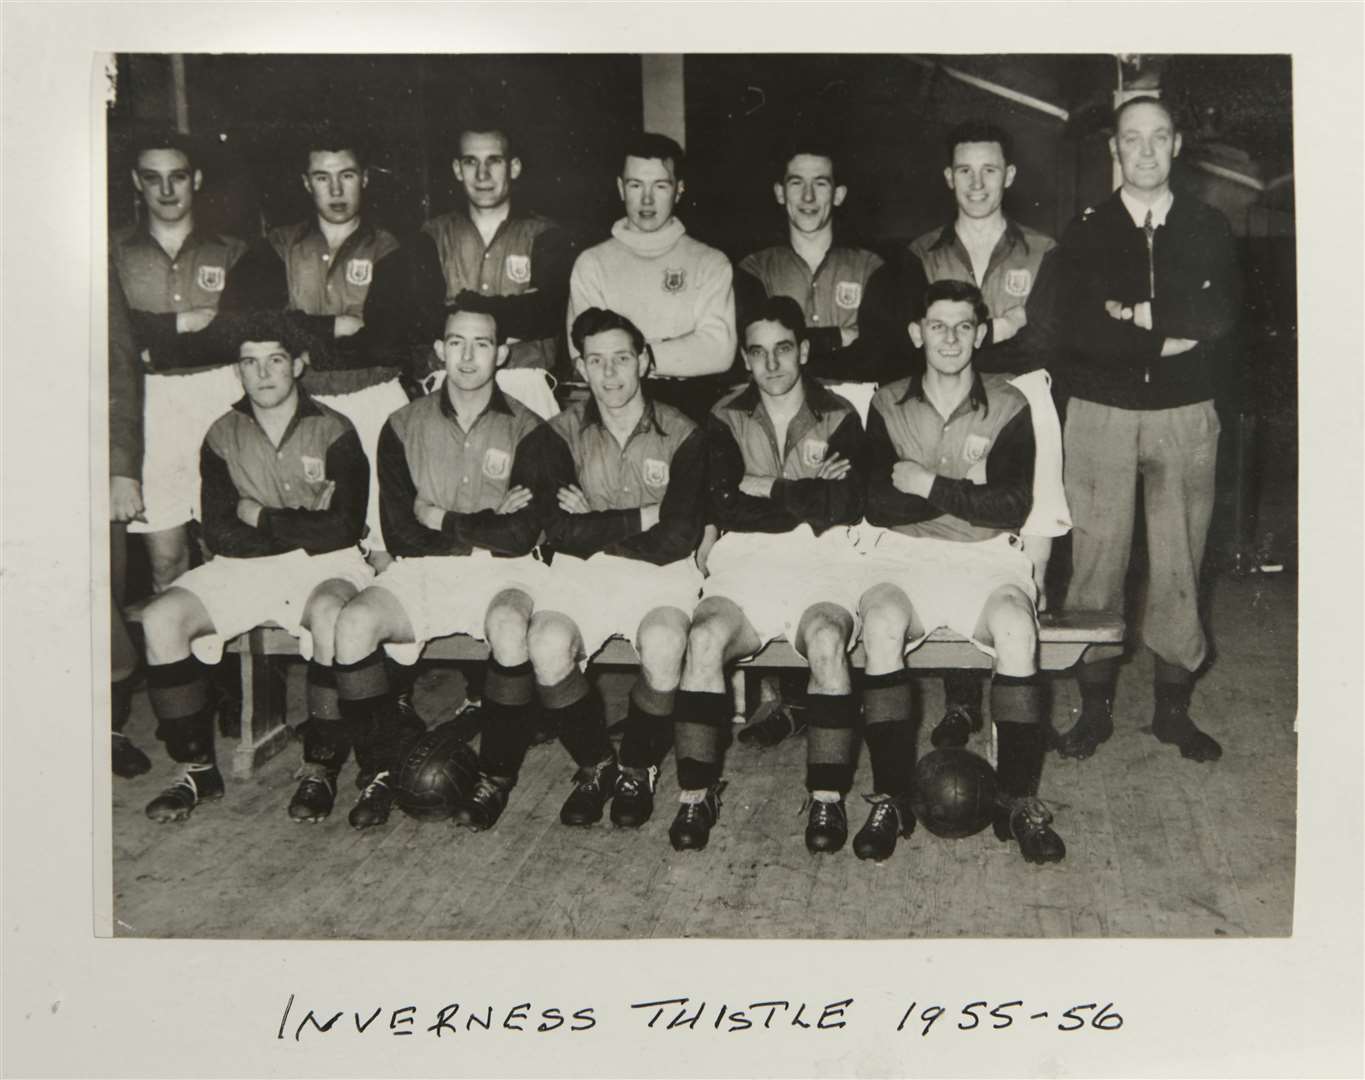 Inverness Thistle team of 1955-56: Back row Gordon Inkster, Dave Christie, Willie Roy, Murd Urquhart, Rod Clyne, Fred Nimmo and Tom McNiven (trainer) Front row: George Herd, Babsy Grant, Andy Mitchell, Willie Jamieson and Dils Hendry.